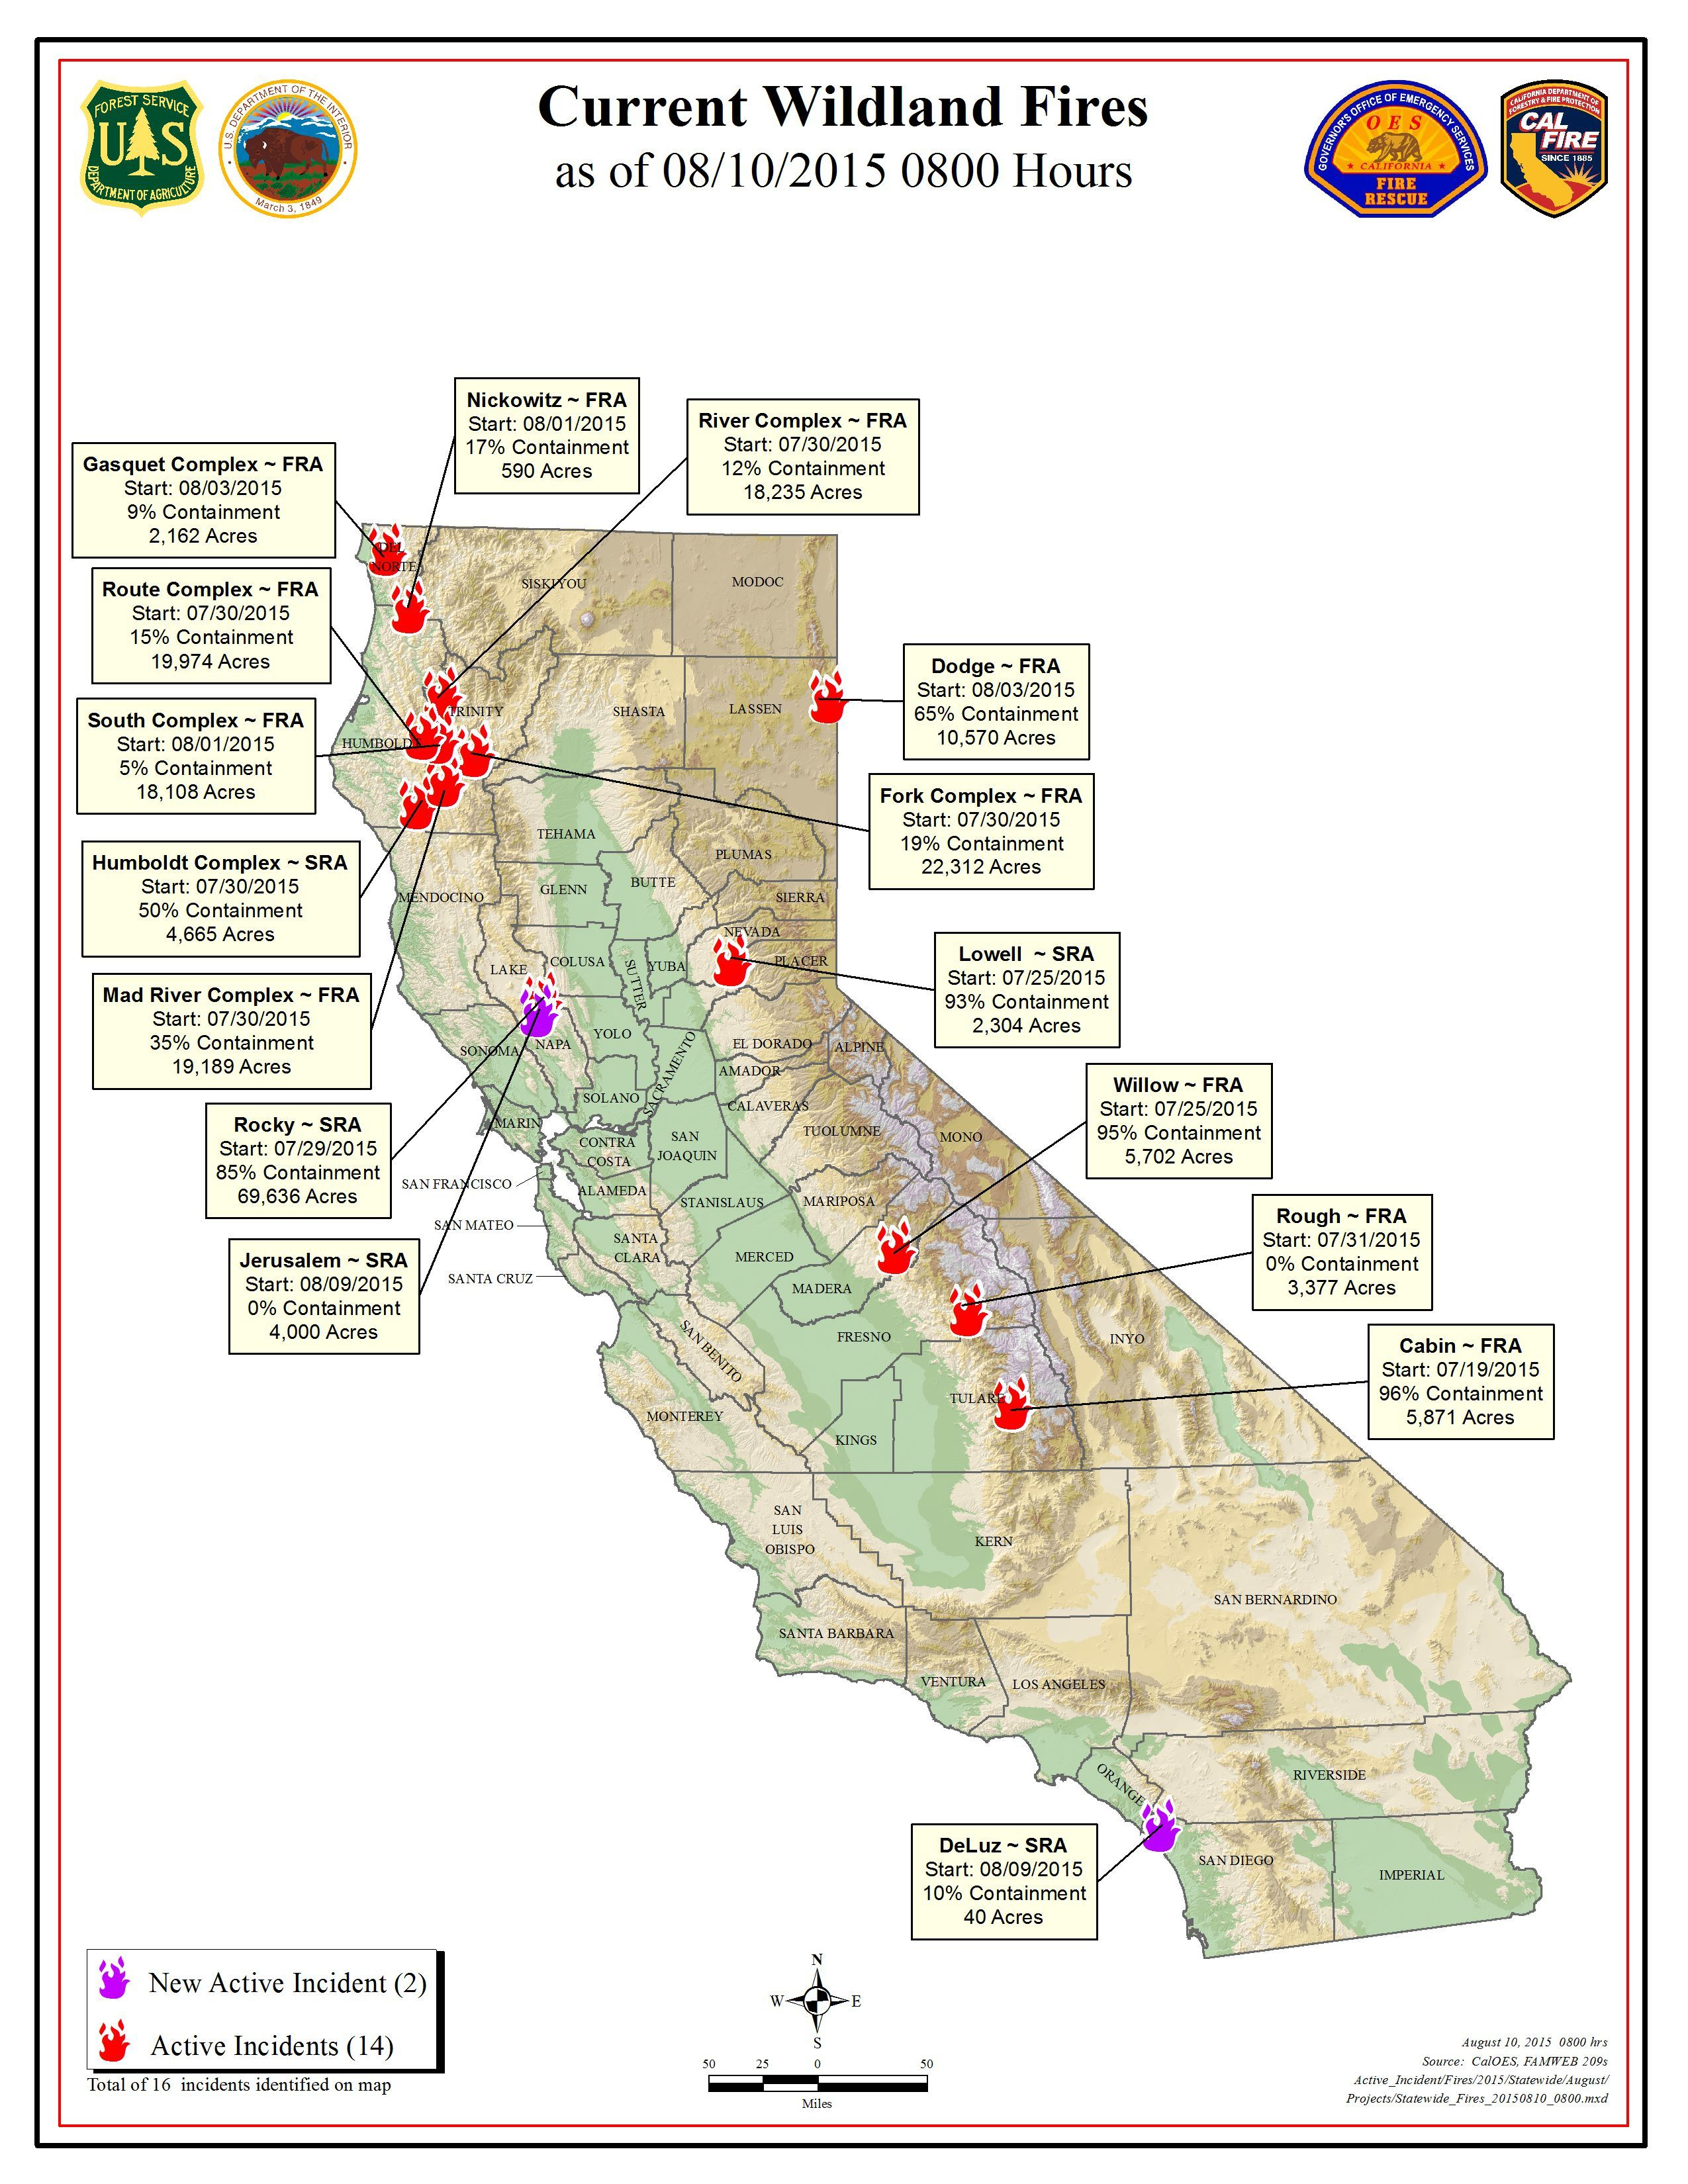 Fire Southern California Map - Klipy - Map Of Current Fires In Southern California